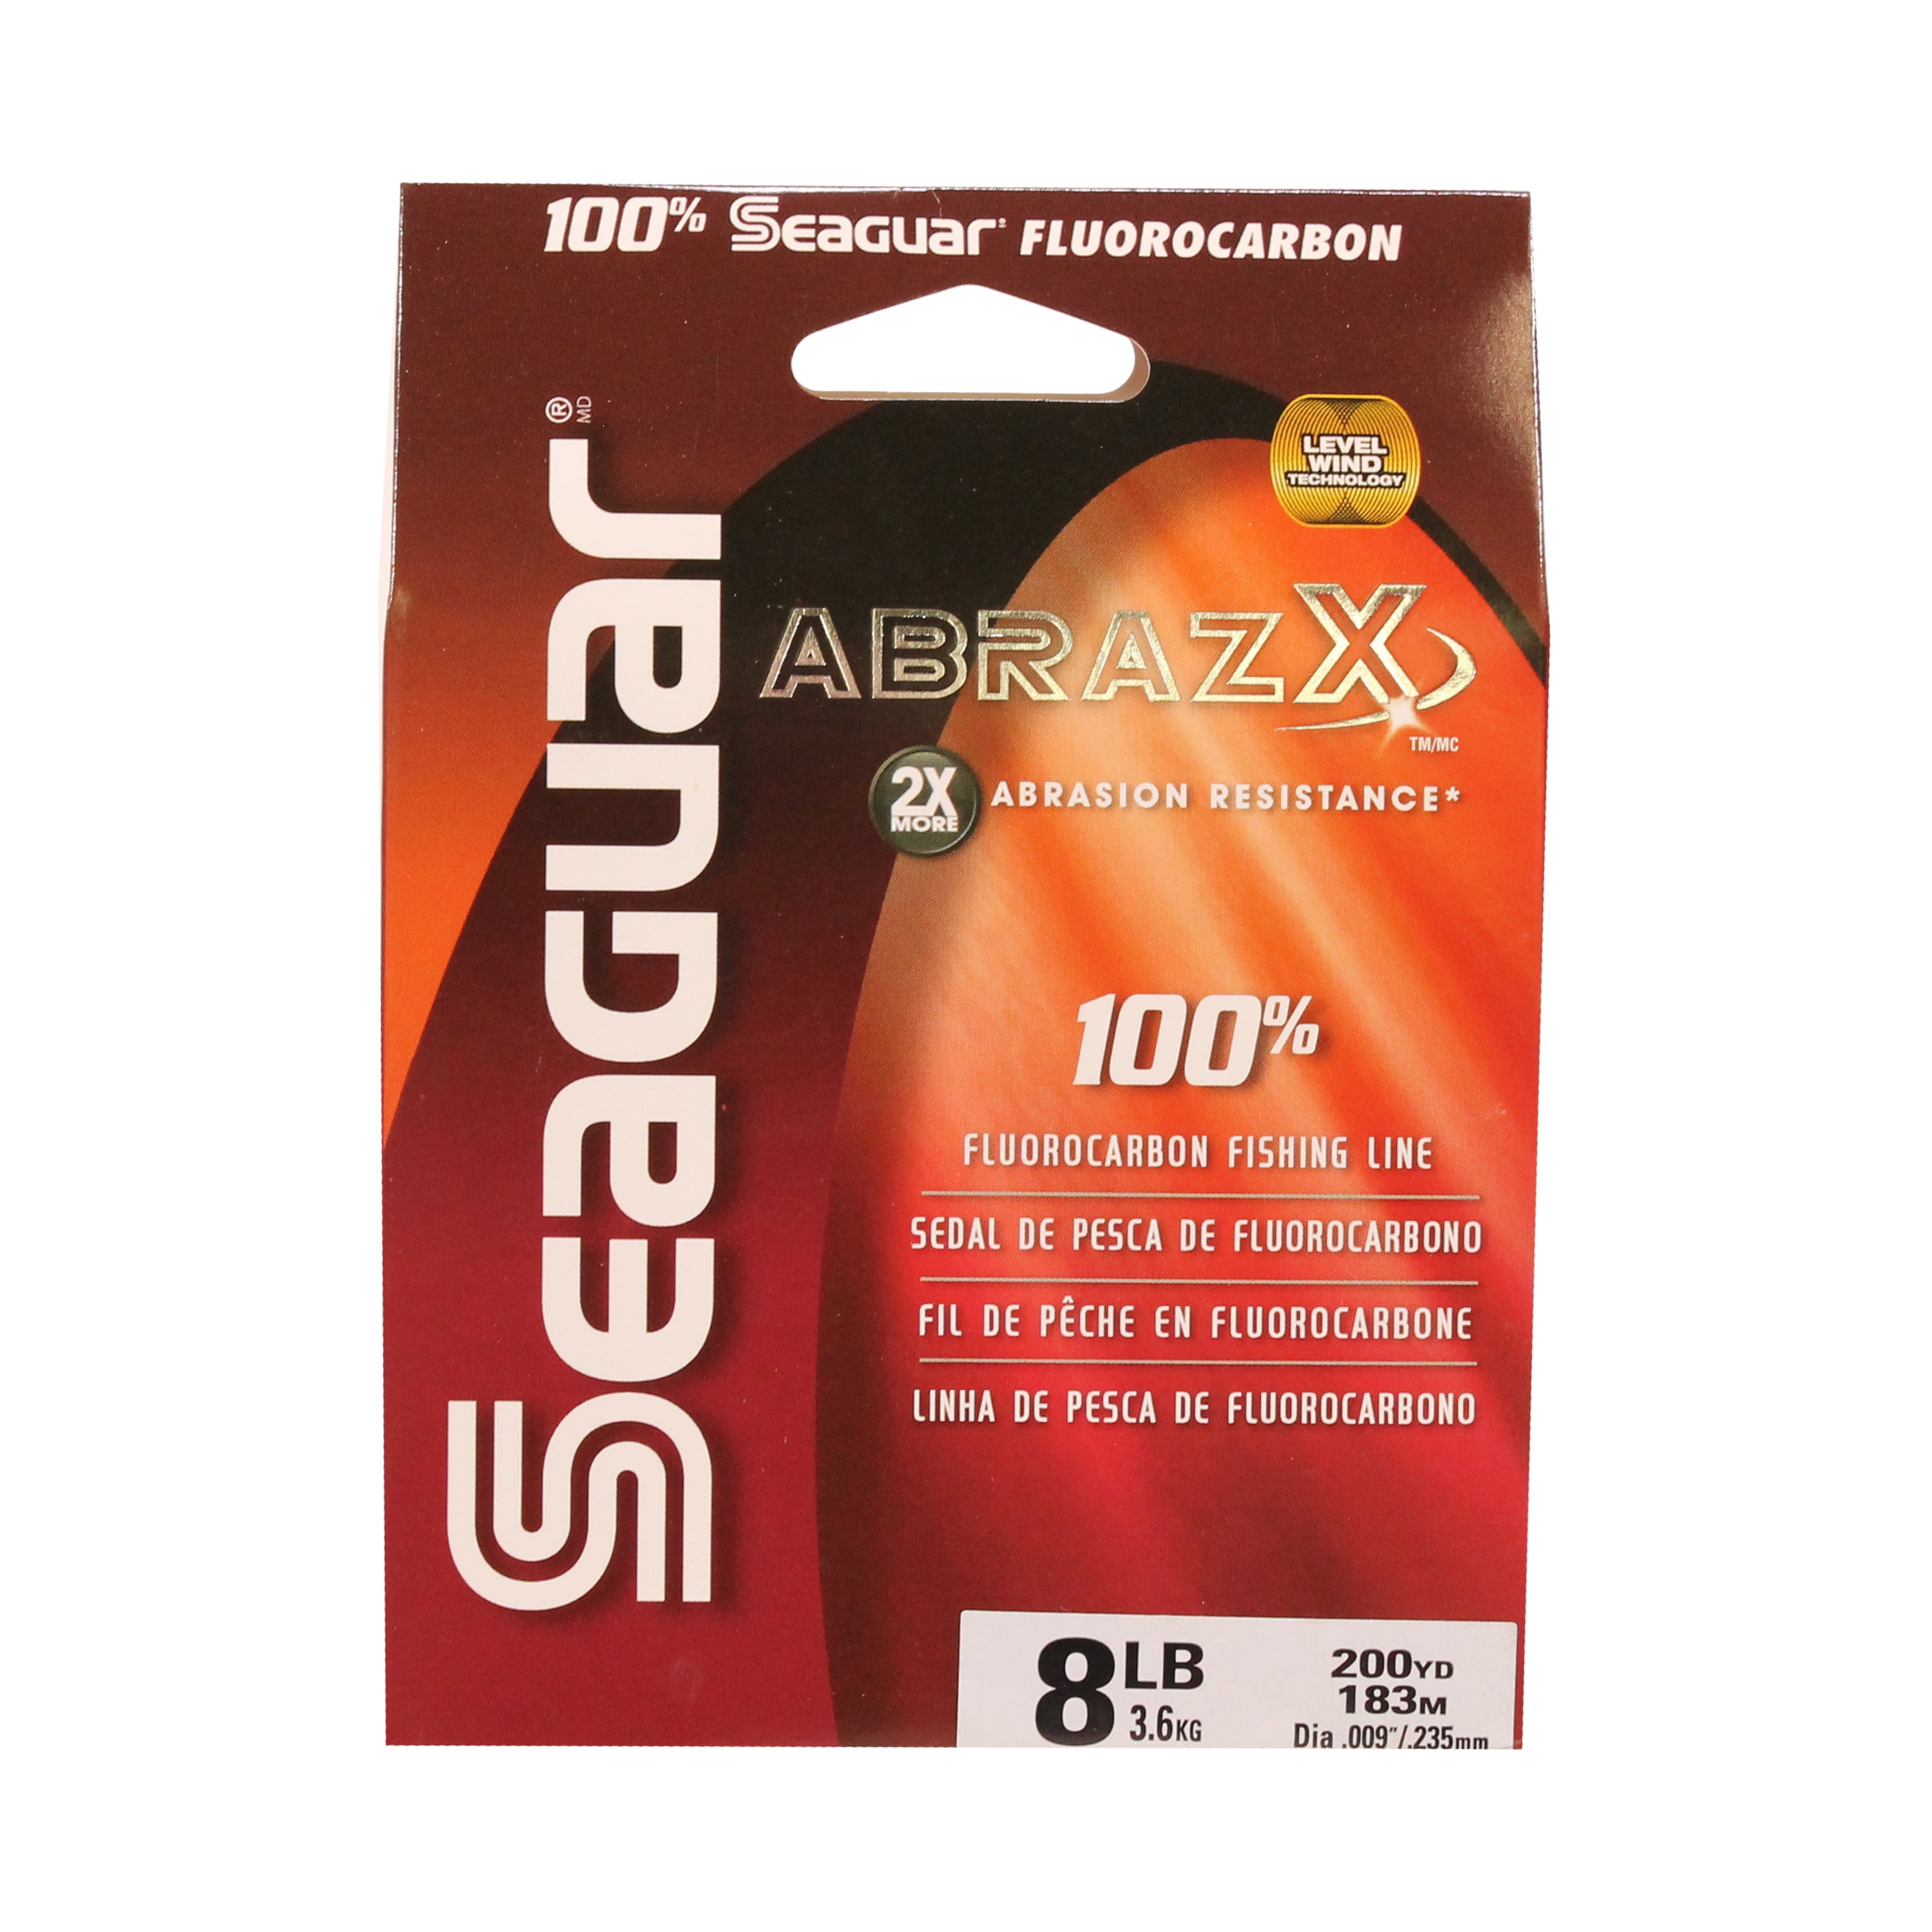 Seaguar Abrazx Fluorocarbon Fishing Line 1000 Yards — Discount Tackle